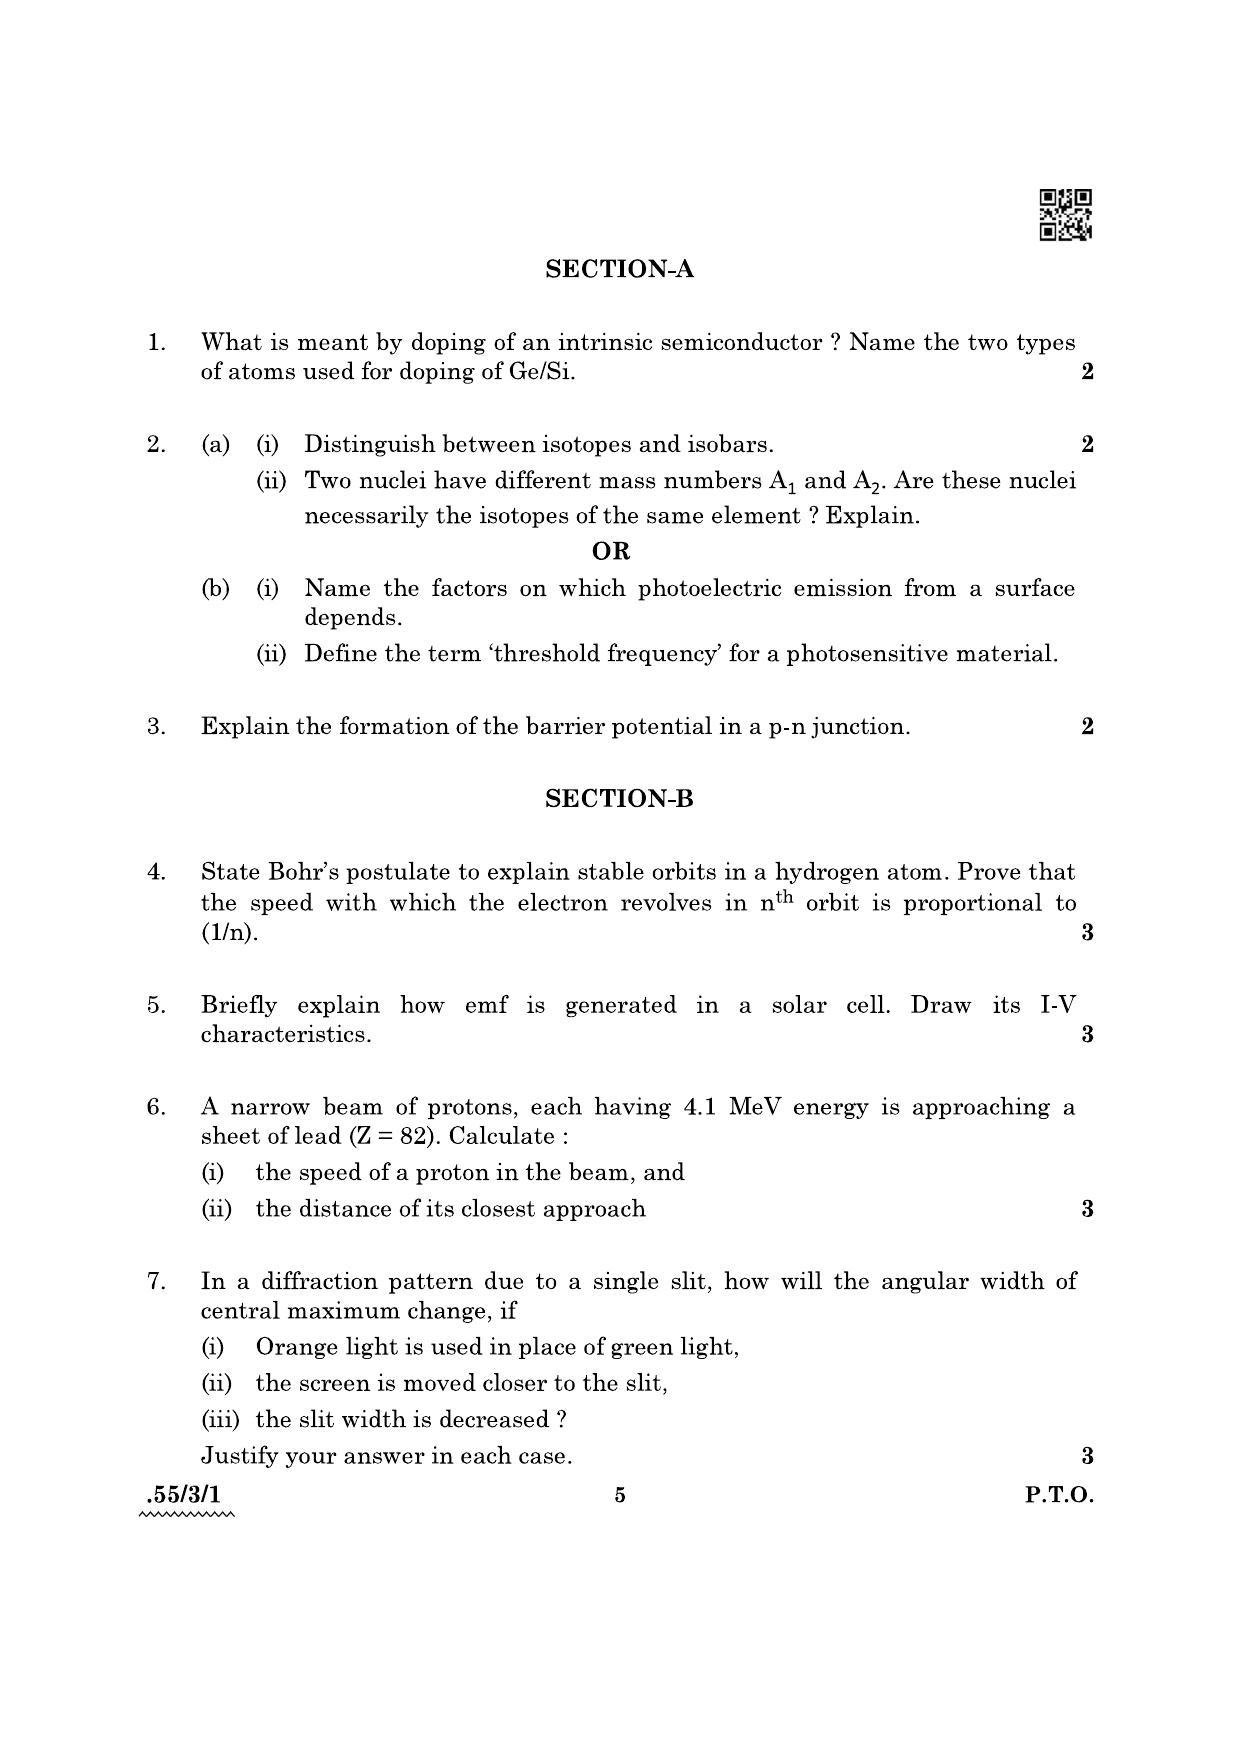 CBSE Class 12 55-3-1 Physics 2022 Question Paper - Page 5